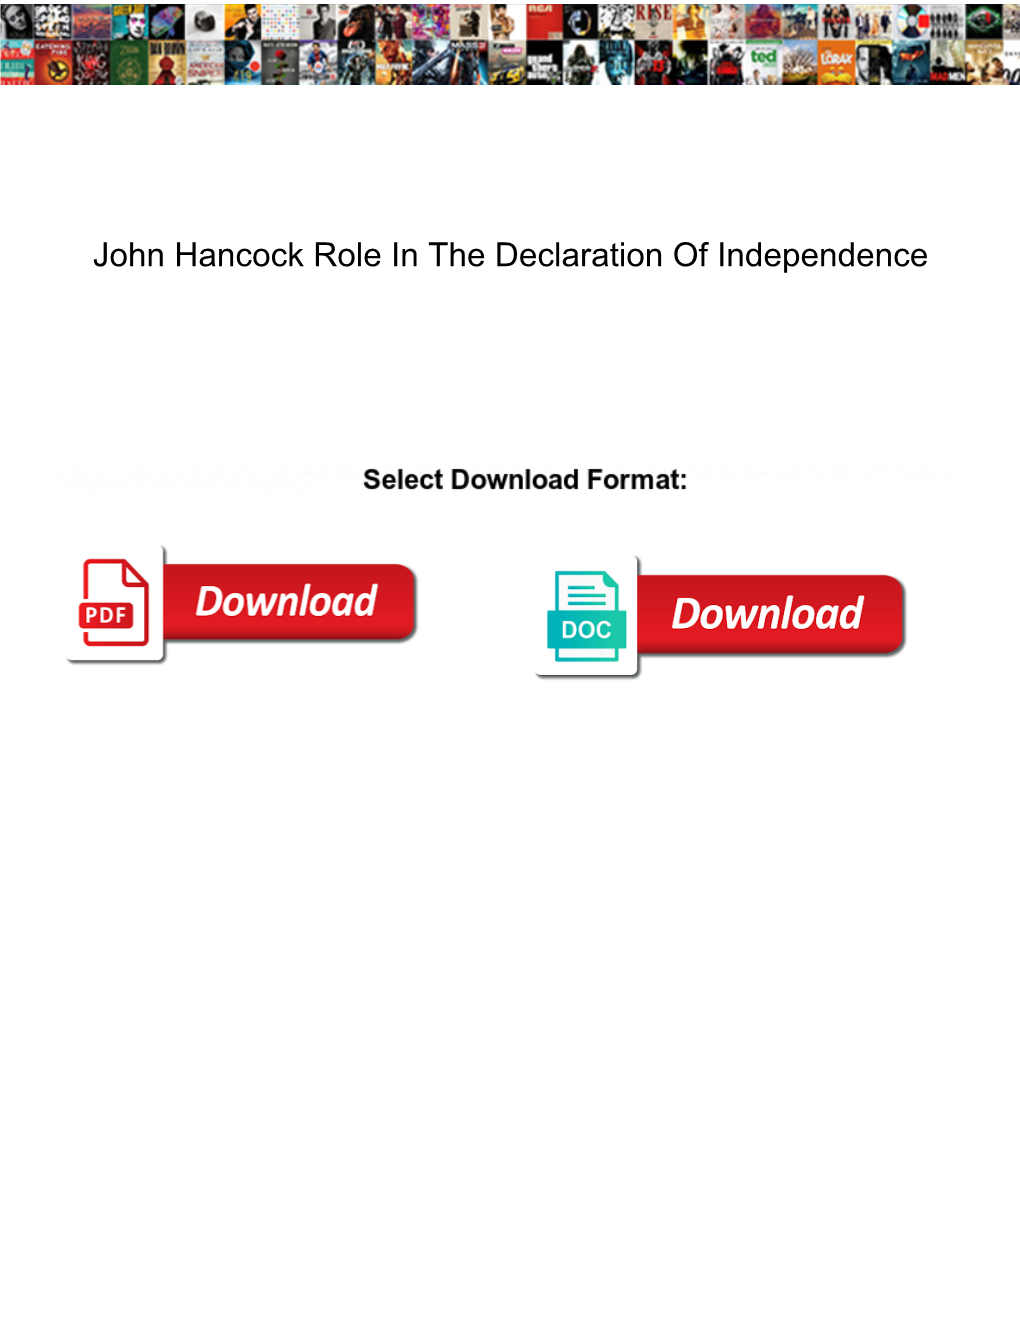 John Hancock Role in the Declaration of Independence